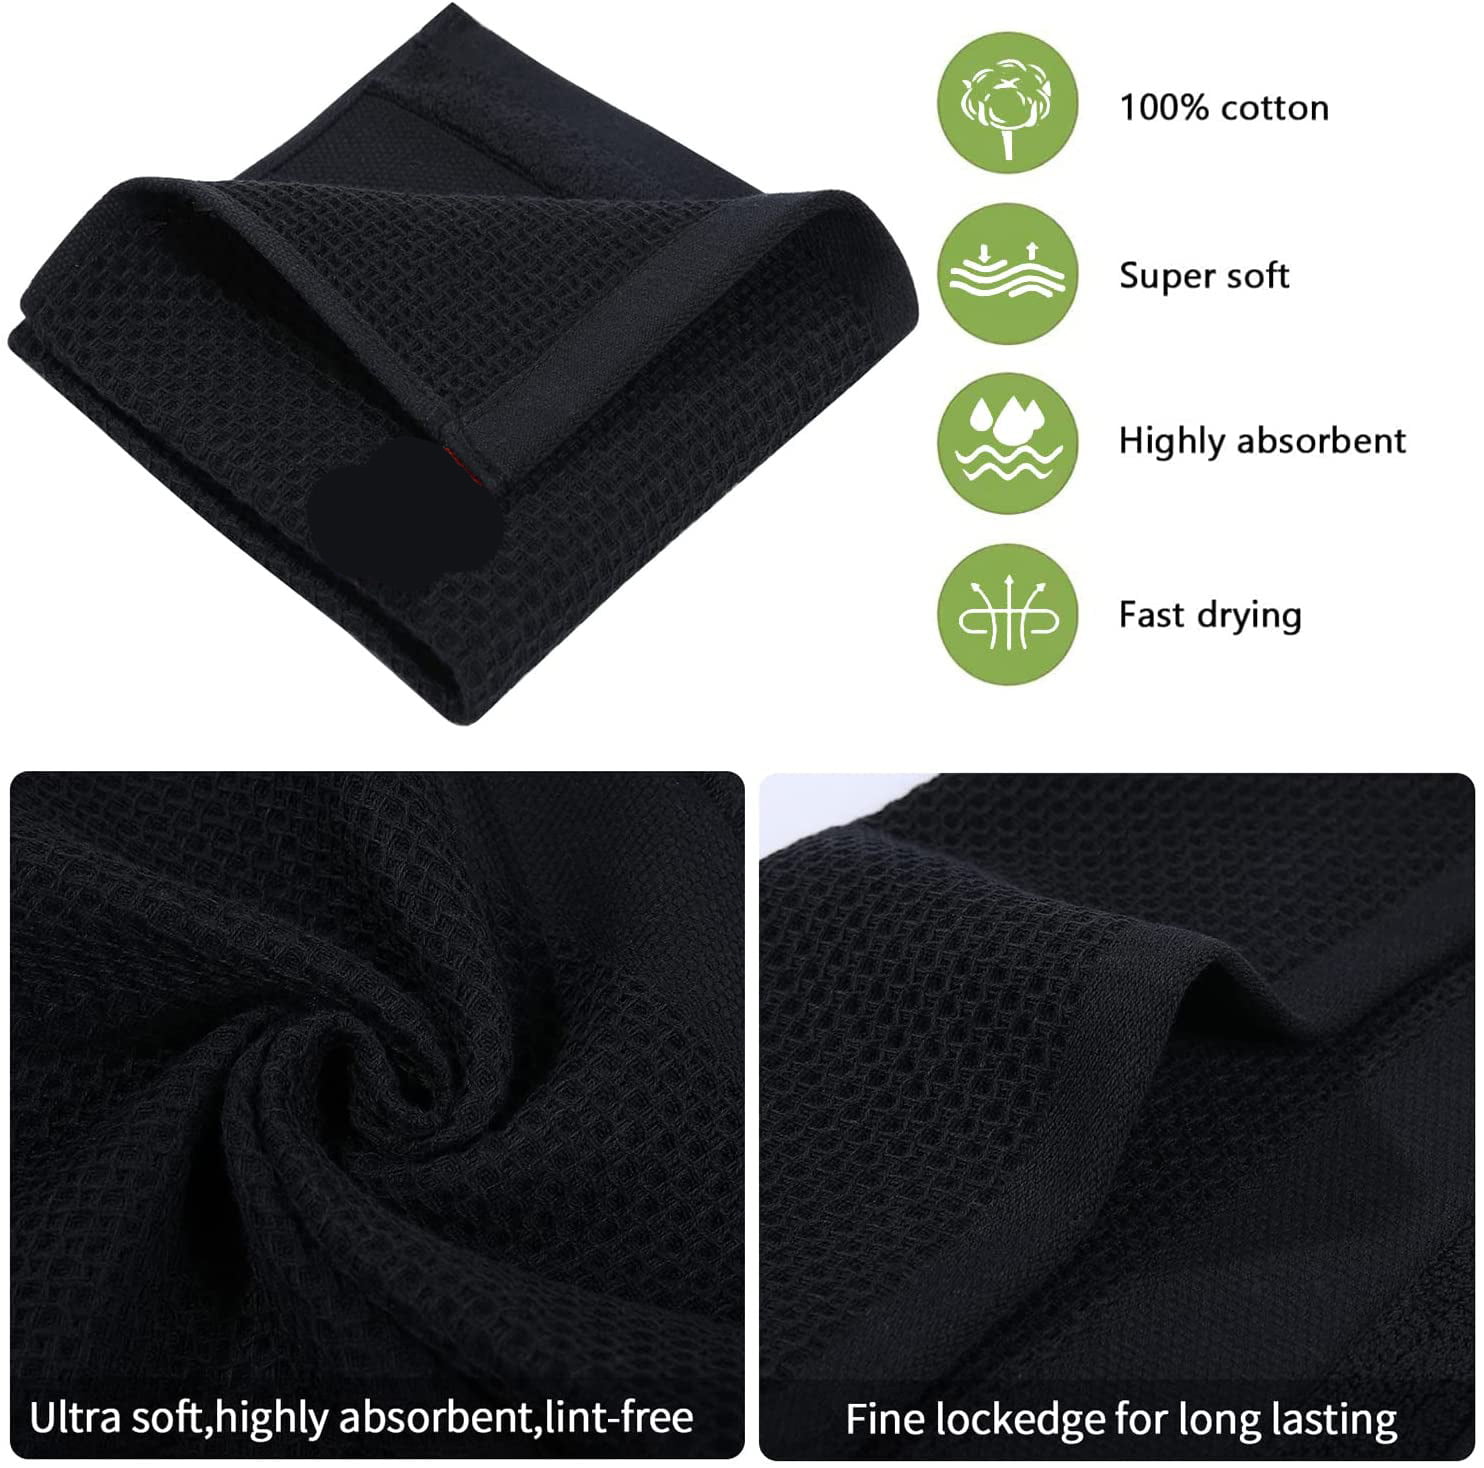 Dishcloths for Kitchen Cotton Terry Dish Cloths 12 Pack Soft and Absorbent  Cleaning Dish Rag 12” X 12” Small Dish Towels (Black & White) 